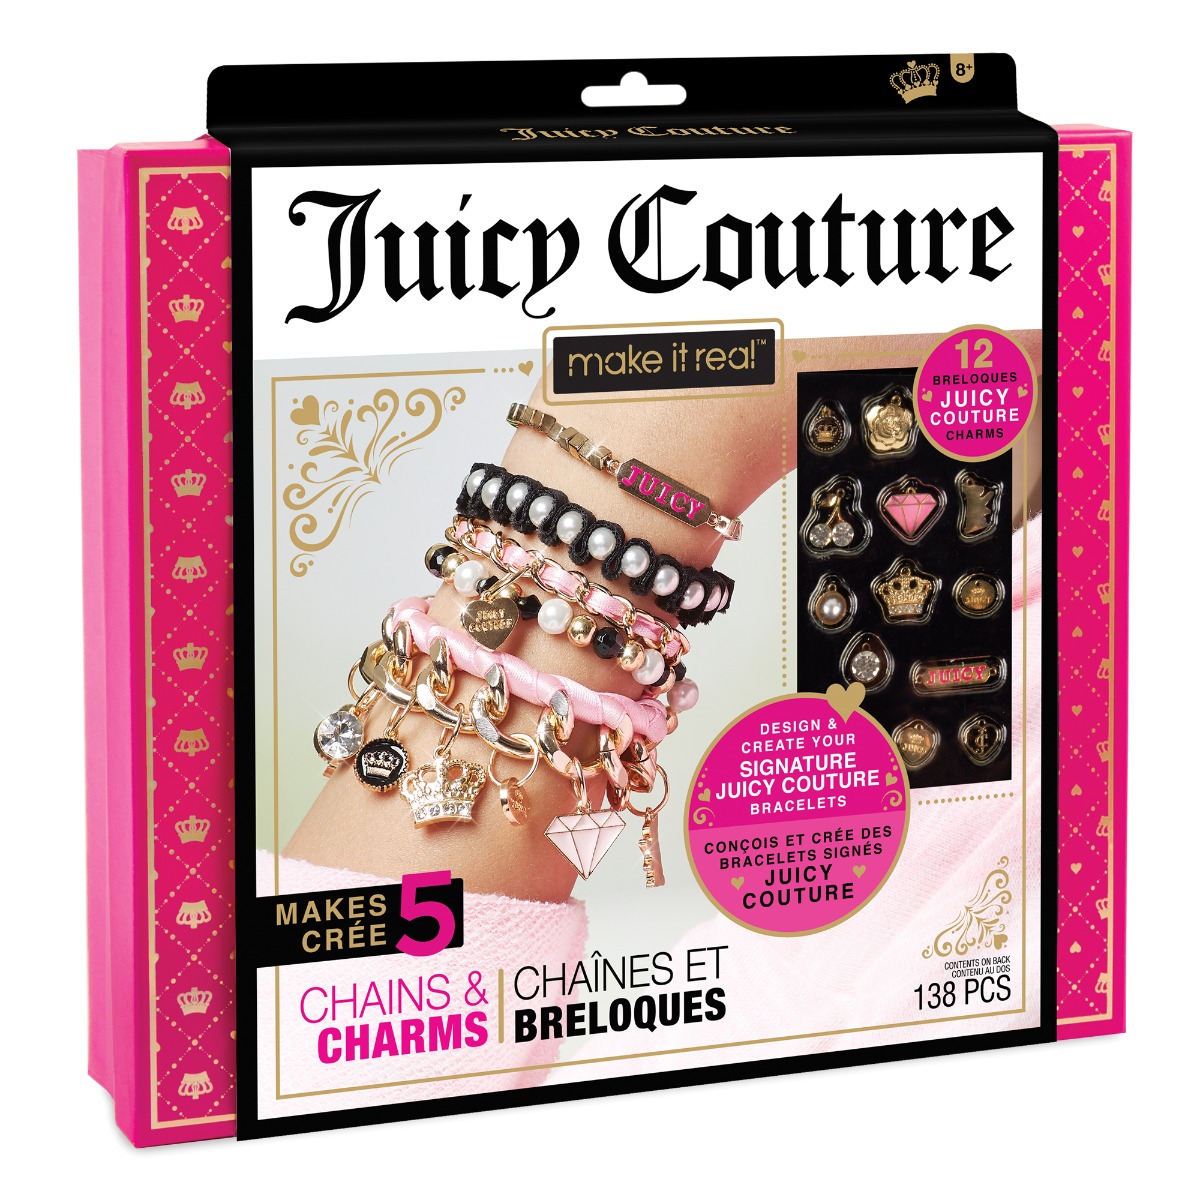 Set de bratari Juicy Couture Chains and Charms, Make It Real, 138 piese 138